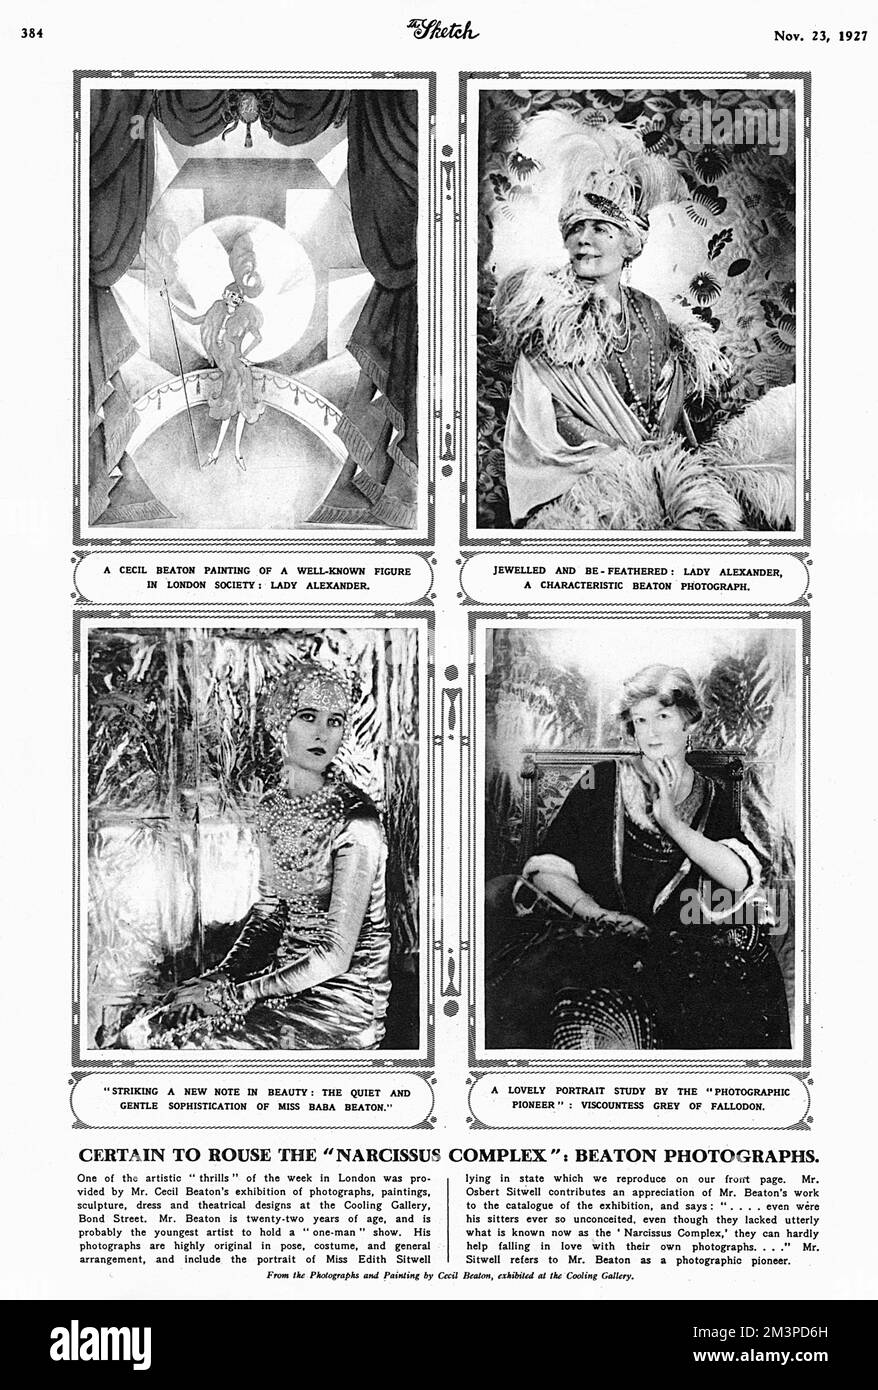 Photographs and a painting by Cecil Beaton, featuring Lady Florence Jane Alexander, Miss Baba Beaton(1912-1973) and Viscountess Grey of Fallodon (1871-1928), in a page in The Sketch, dated 23rd November 1927. These images also featured at the time in an exhibition in The Cooling Gallery on Bond Street.     Date: 1927 Stock Photo